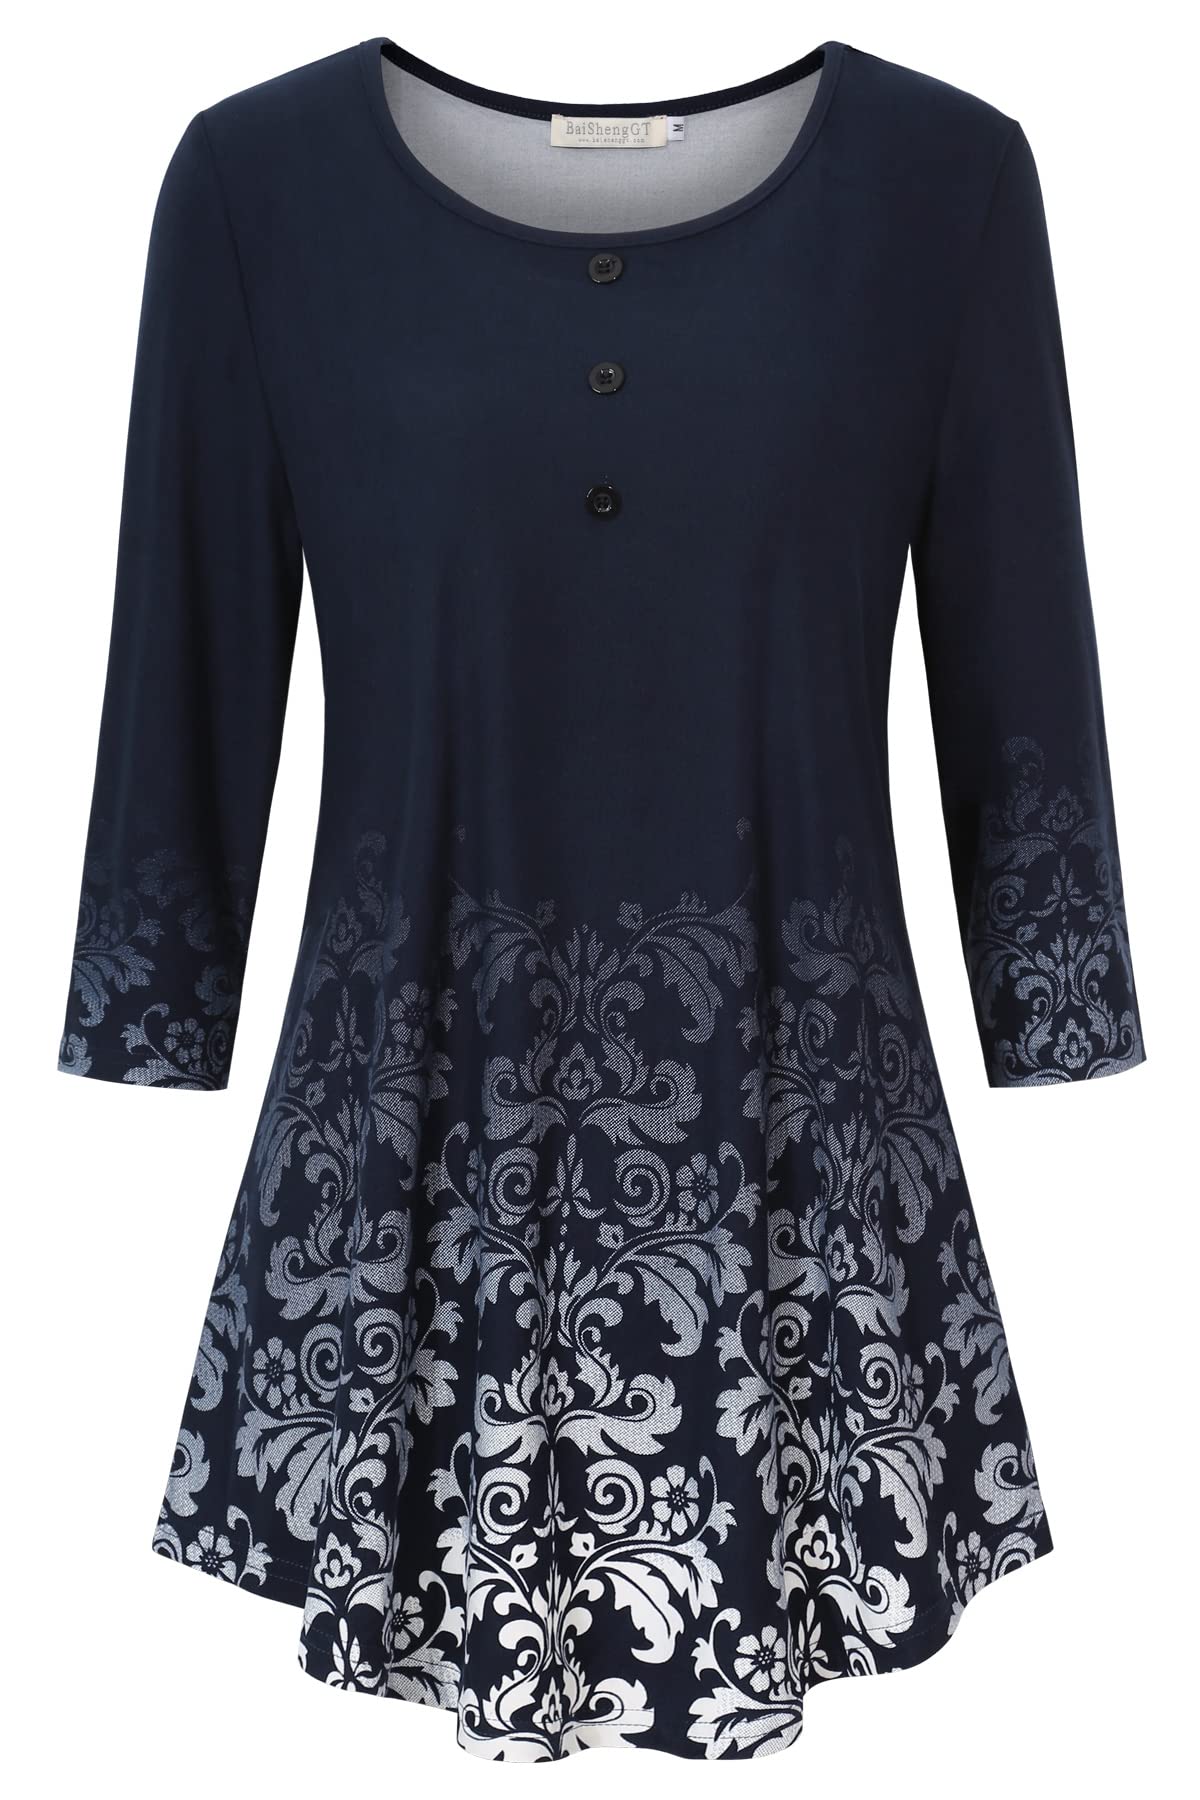 BAISHENGGT Women's  Dark Blue Floral O Neck A line Blouse Floral Lace Tunic Tops